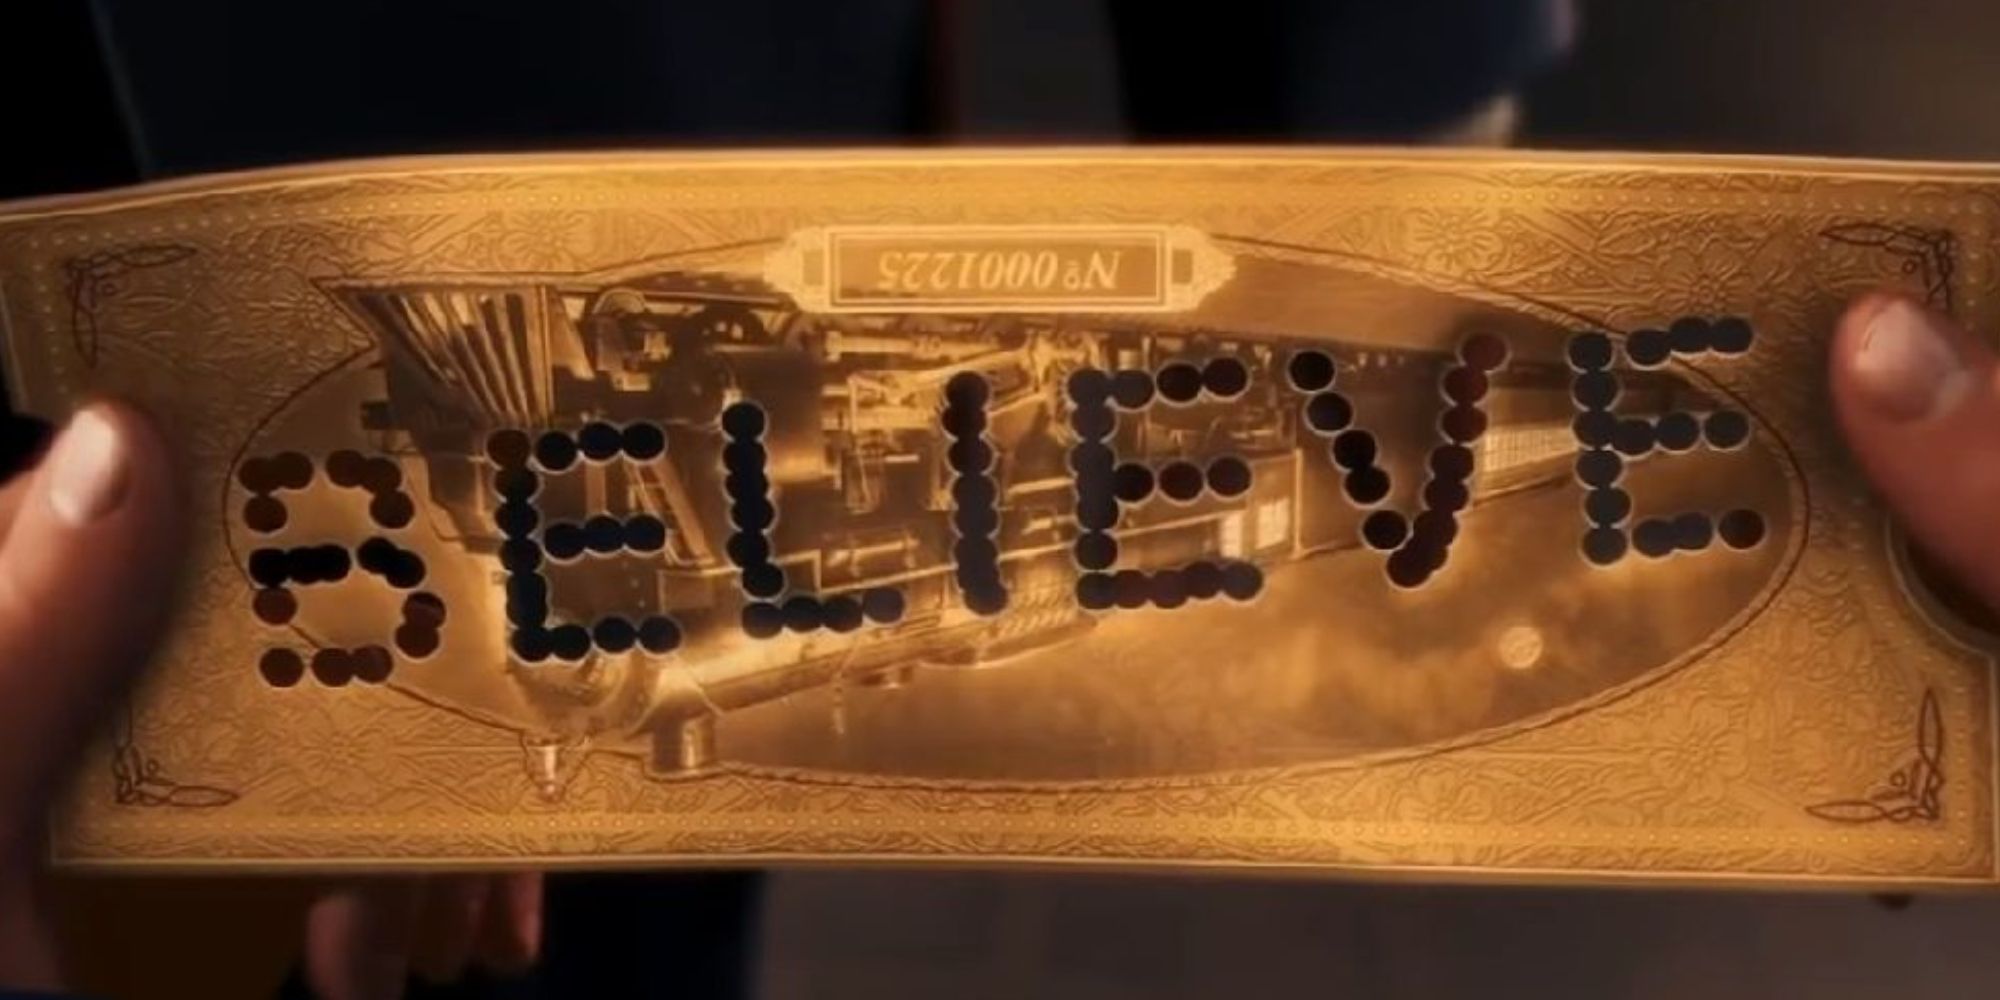 The Believe Ticket in the boy's hand from The Polar Express